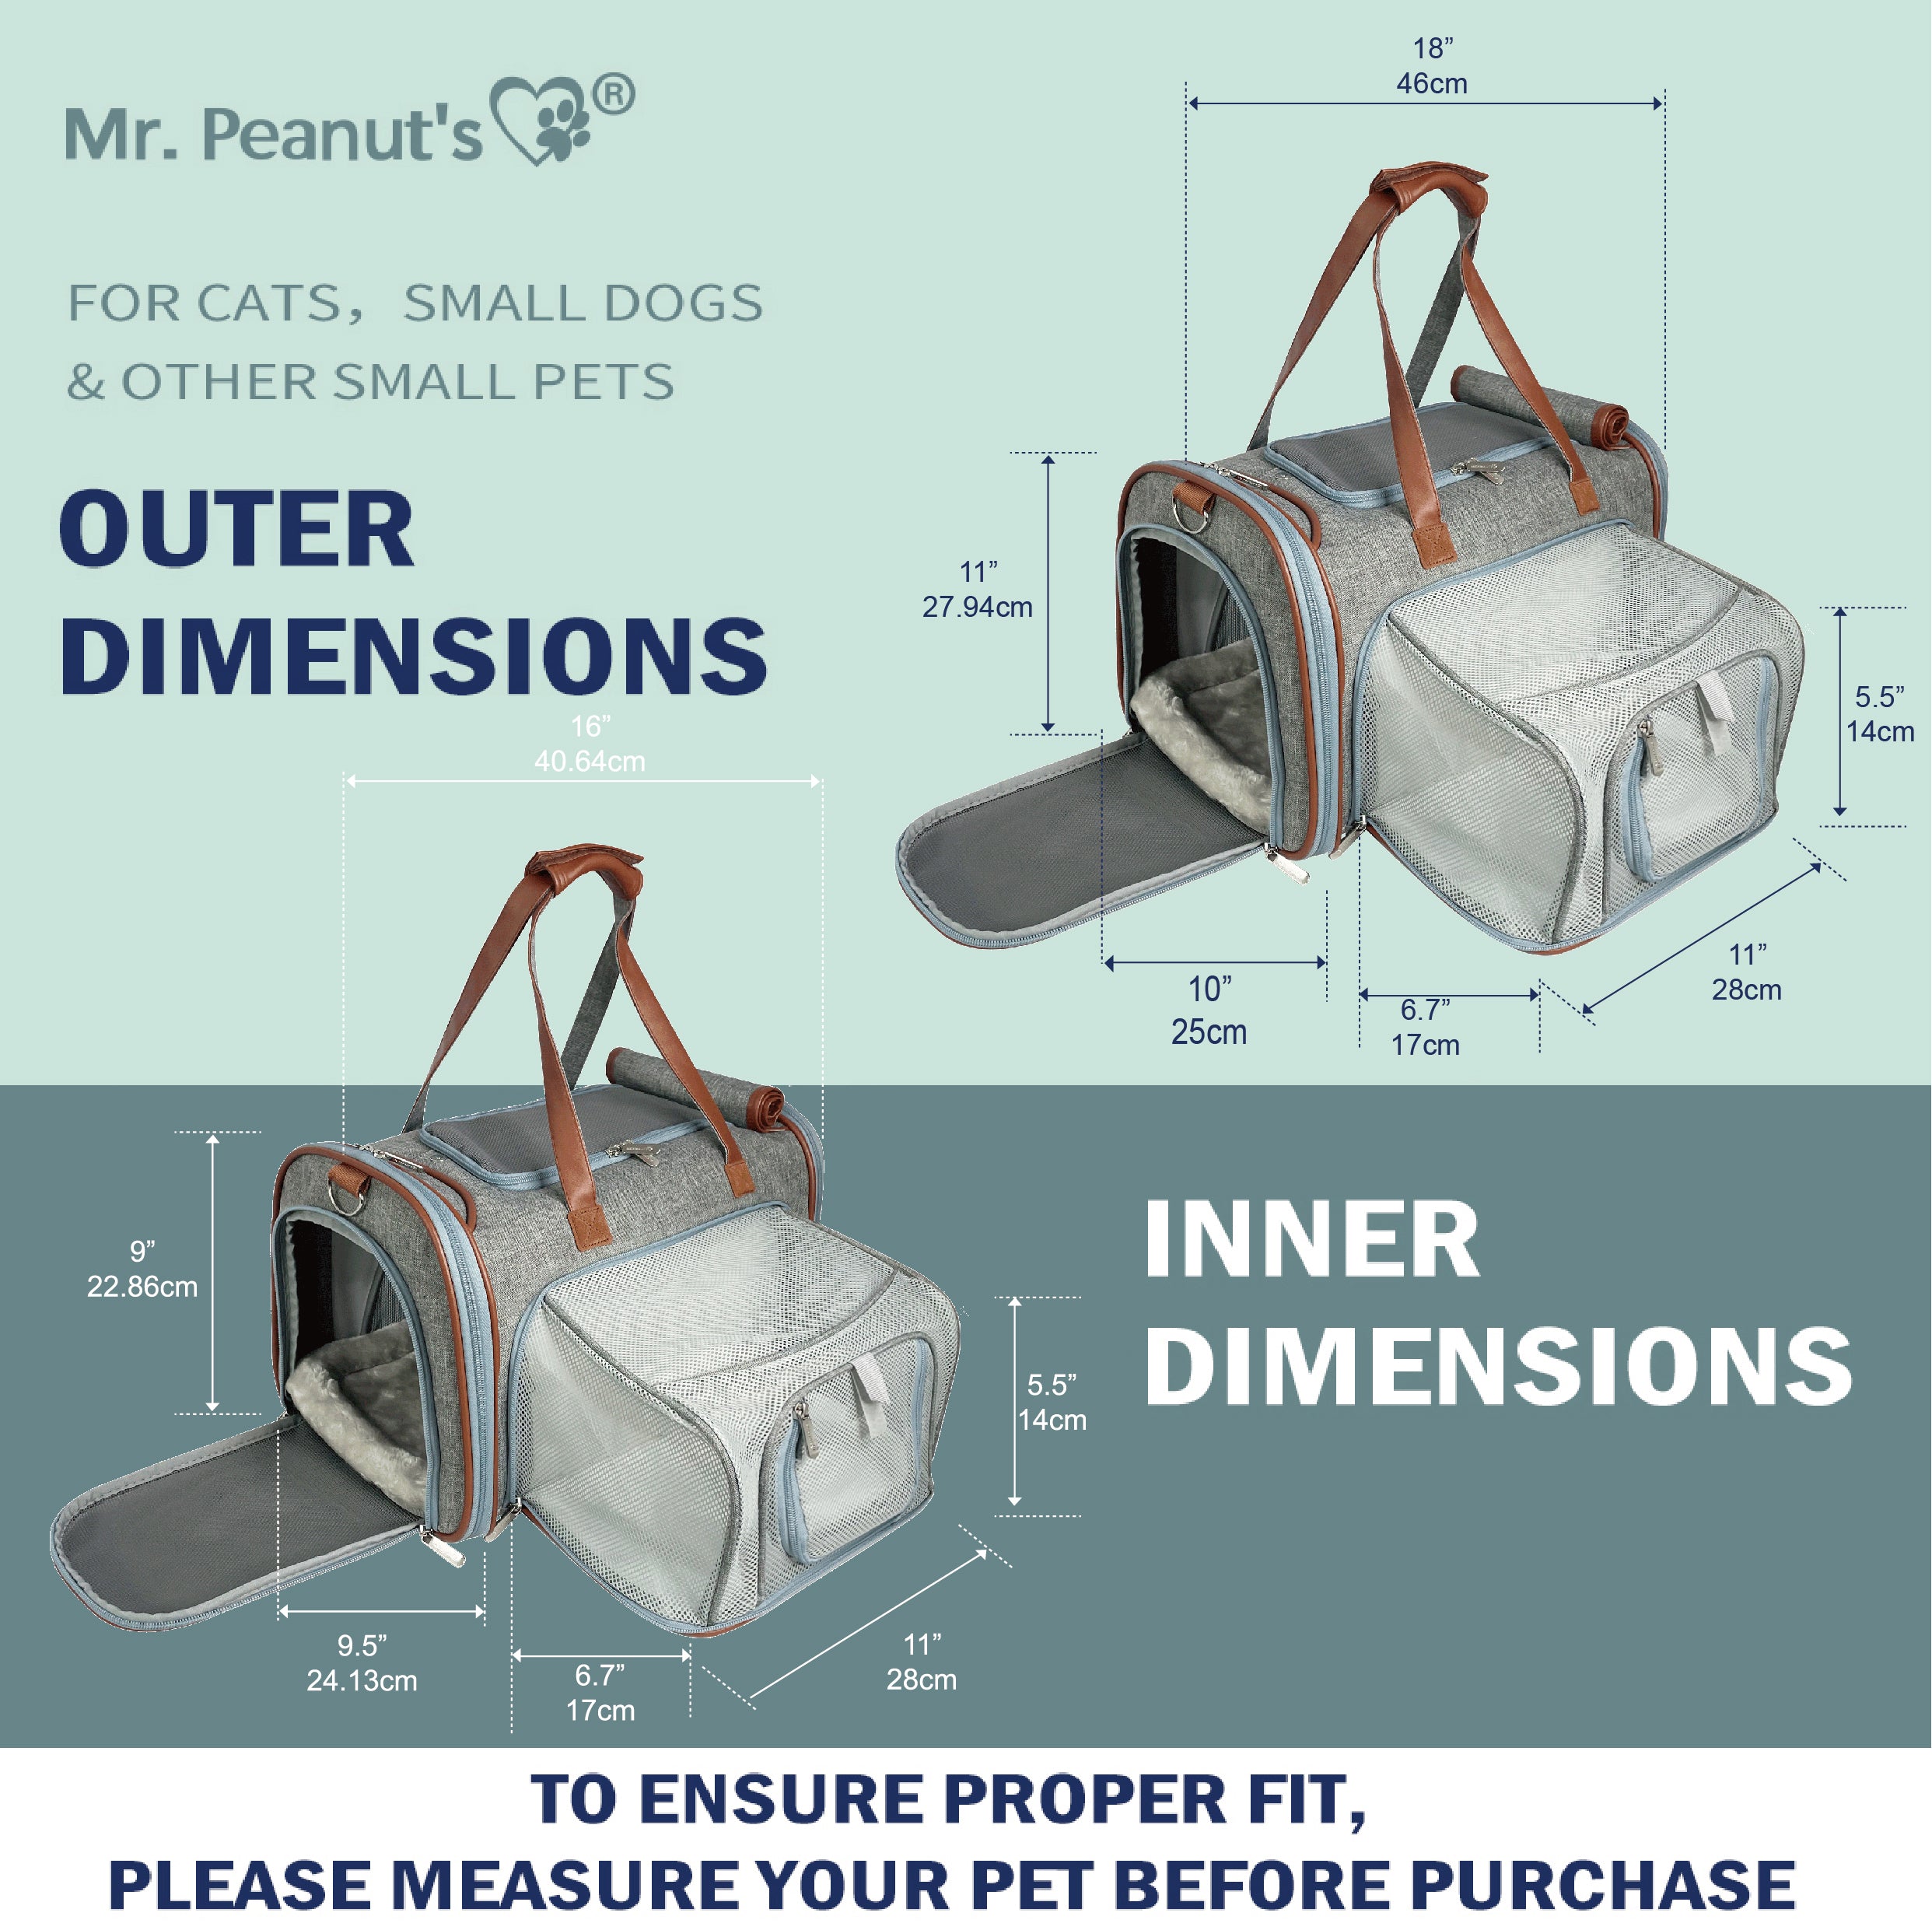 Mr. Peanut's Gold Series Airline Approved Tote - Low Profile Soft Sided Premium Pet Carrier